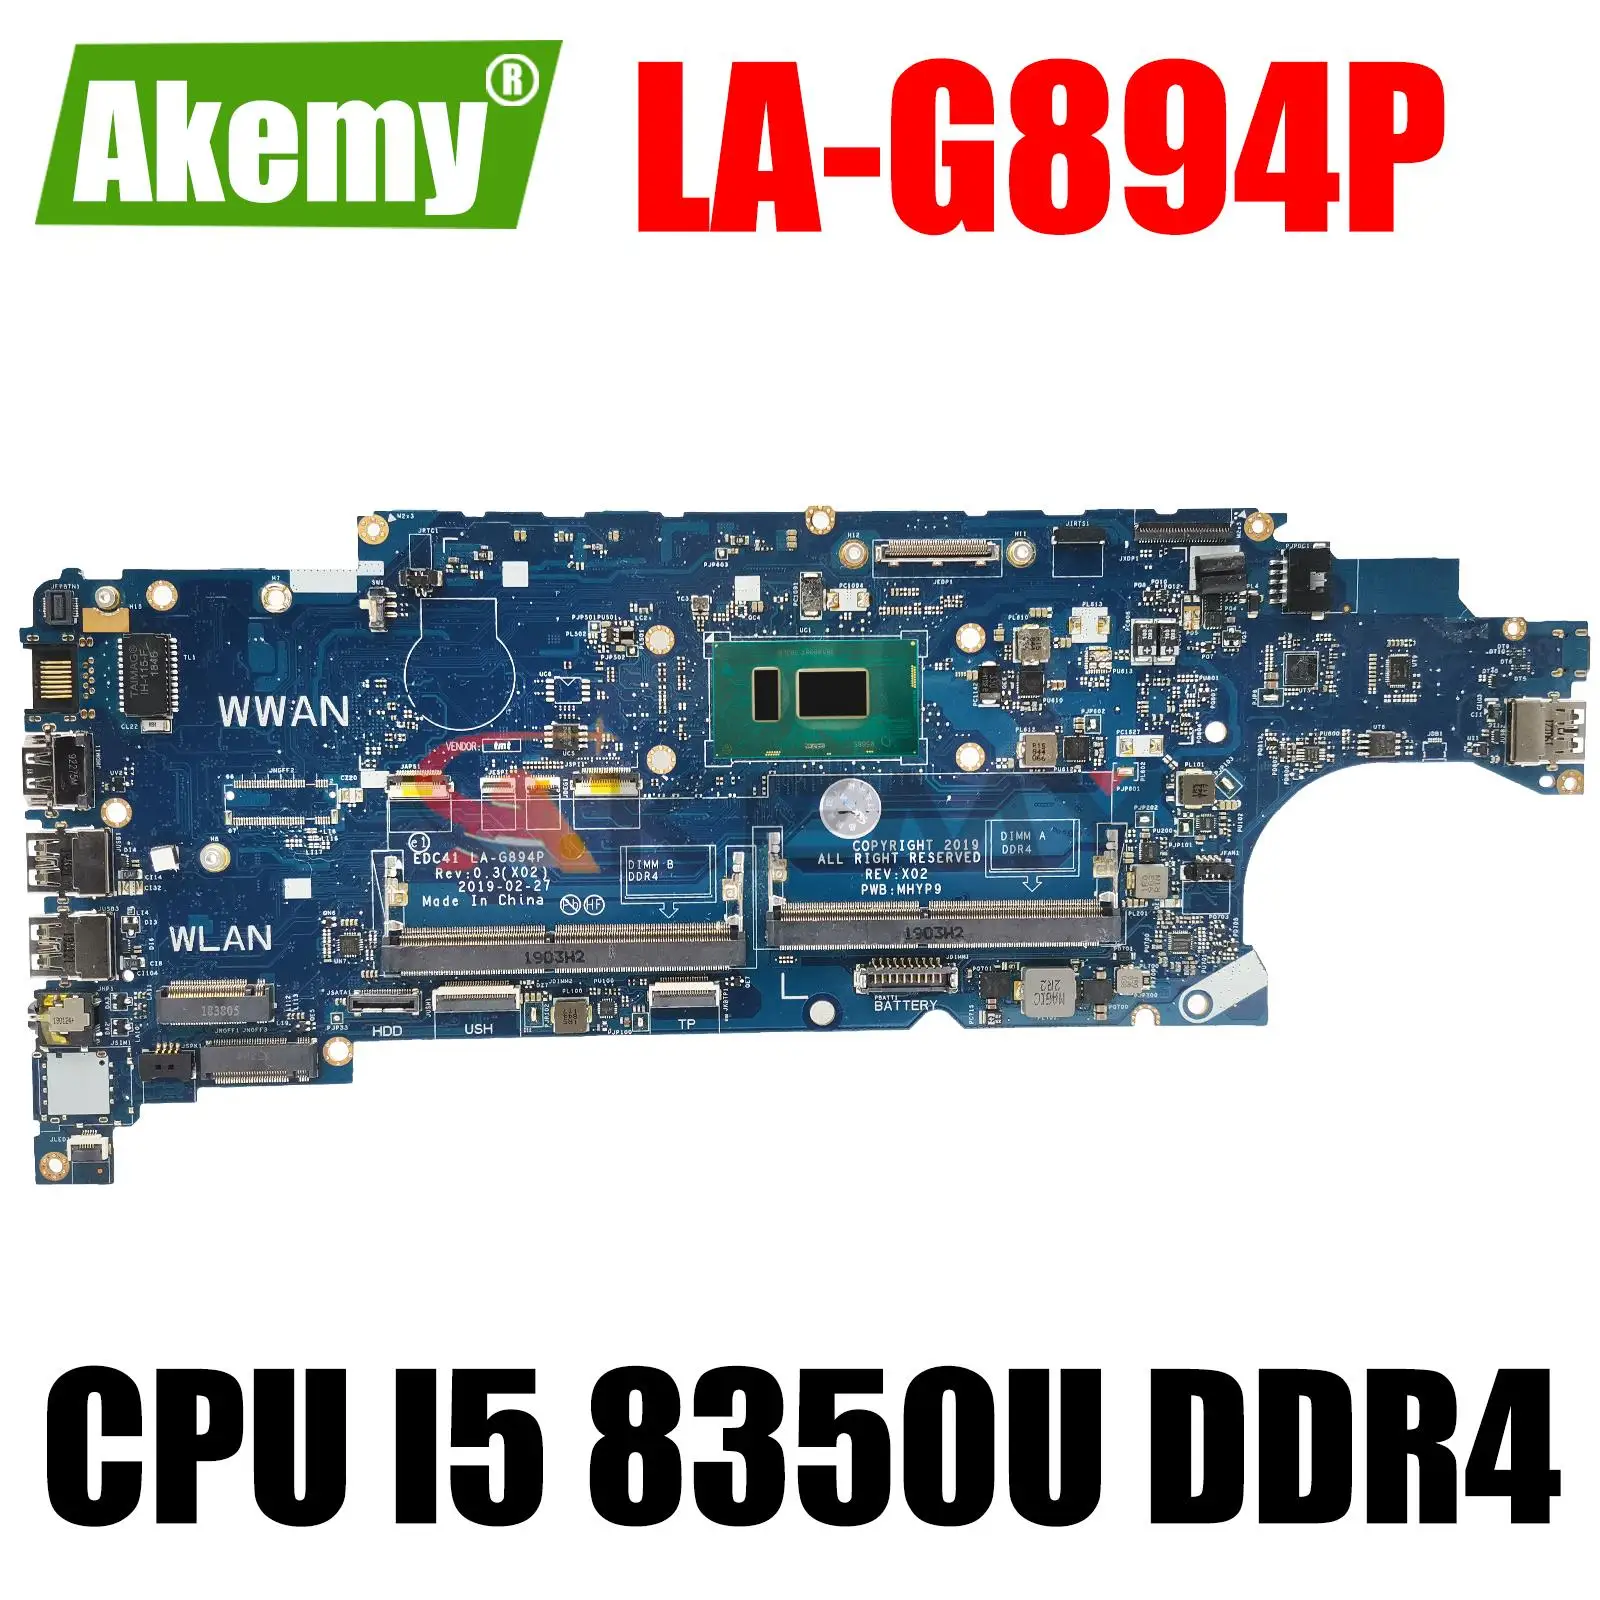 

For DELL Latitude 5400 Laptop Motherboard With I5 CPU DDR4 EDC41 LA-G894P CN-0M9MXD CN-043NHW 100% testing ok